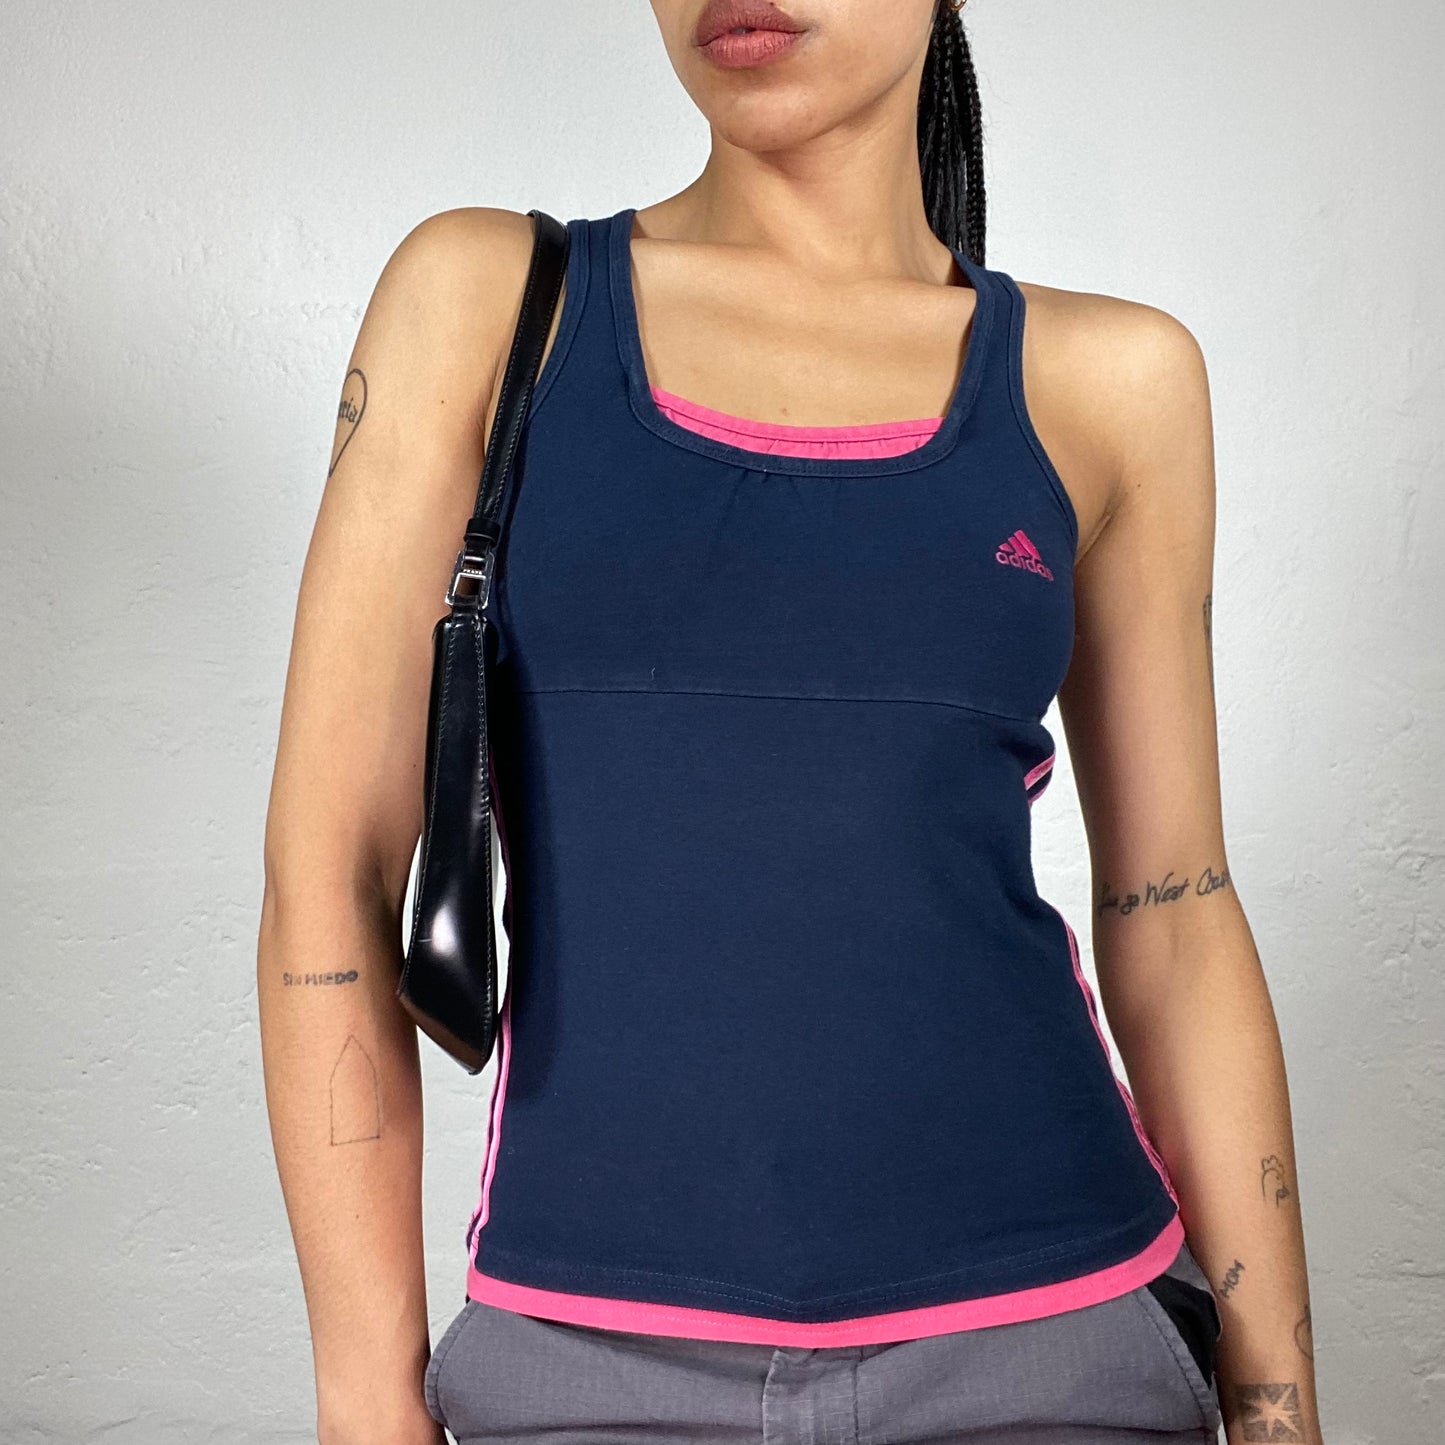 Vintage 2000's Sporty Adidas Navy Blue Tank Top with Neon Pink Accents and aside Stripes (S)